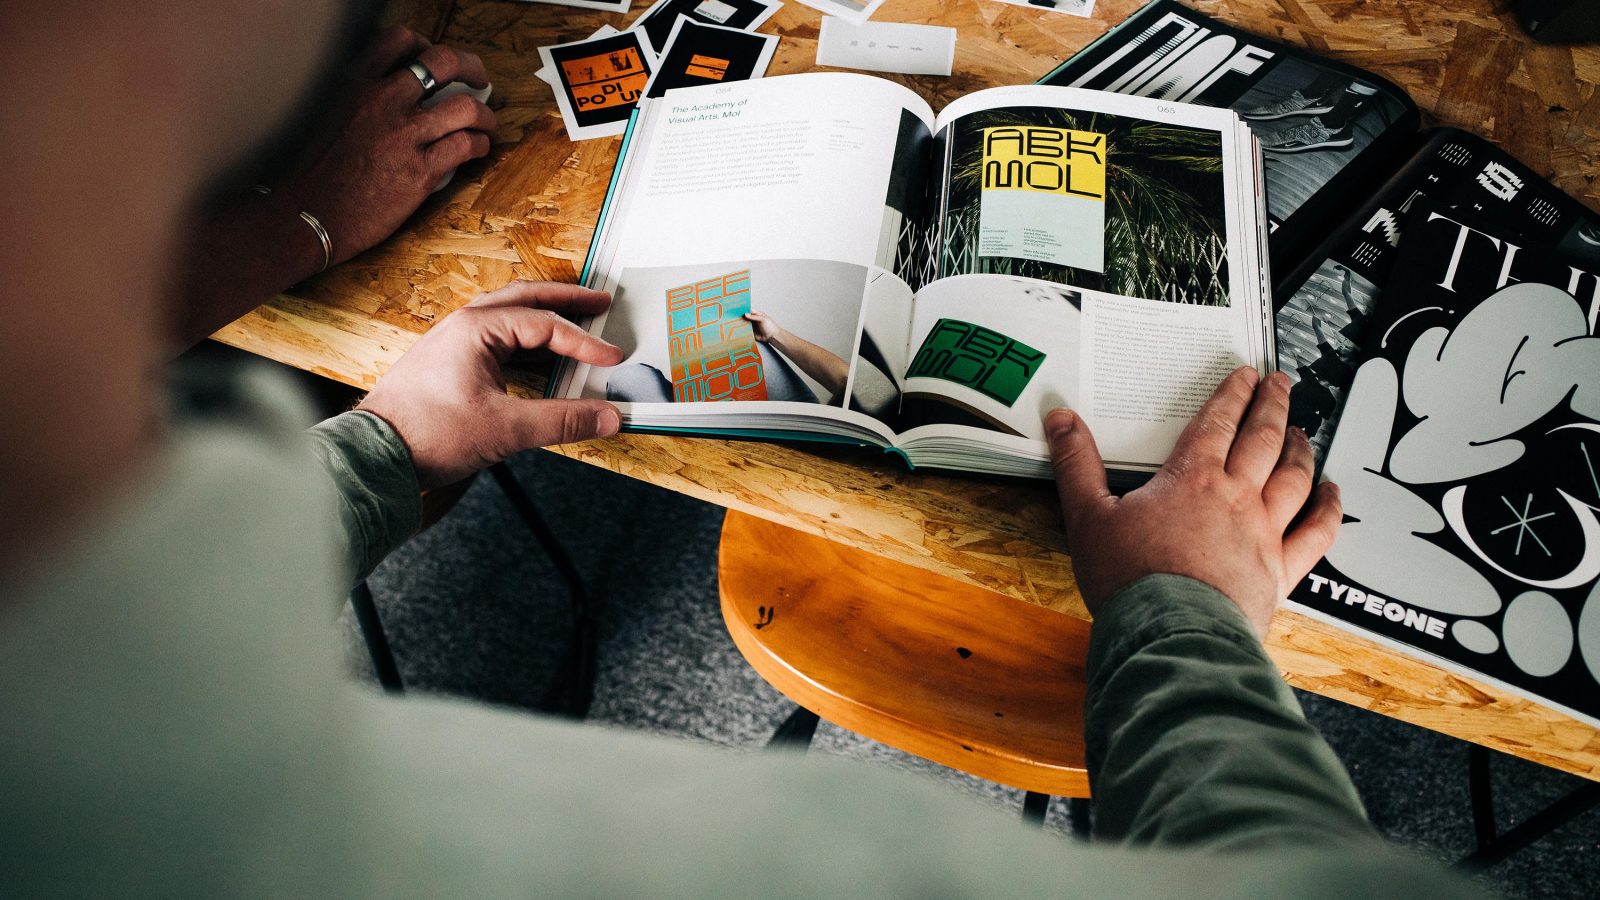 A person in a green jacket reading a design magazine opened to a page about typography at a brand design agency. Various print materials are scattered across a wooden desk.